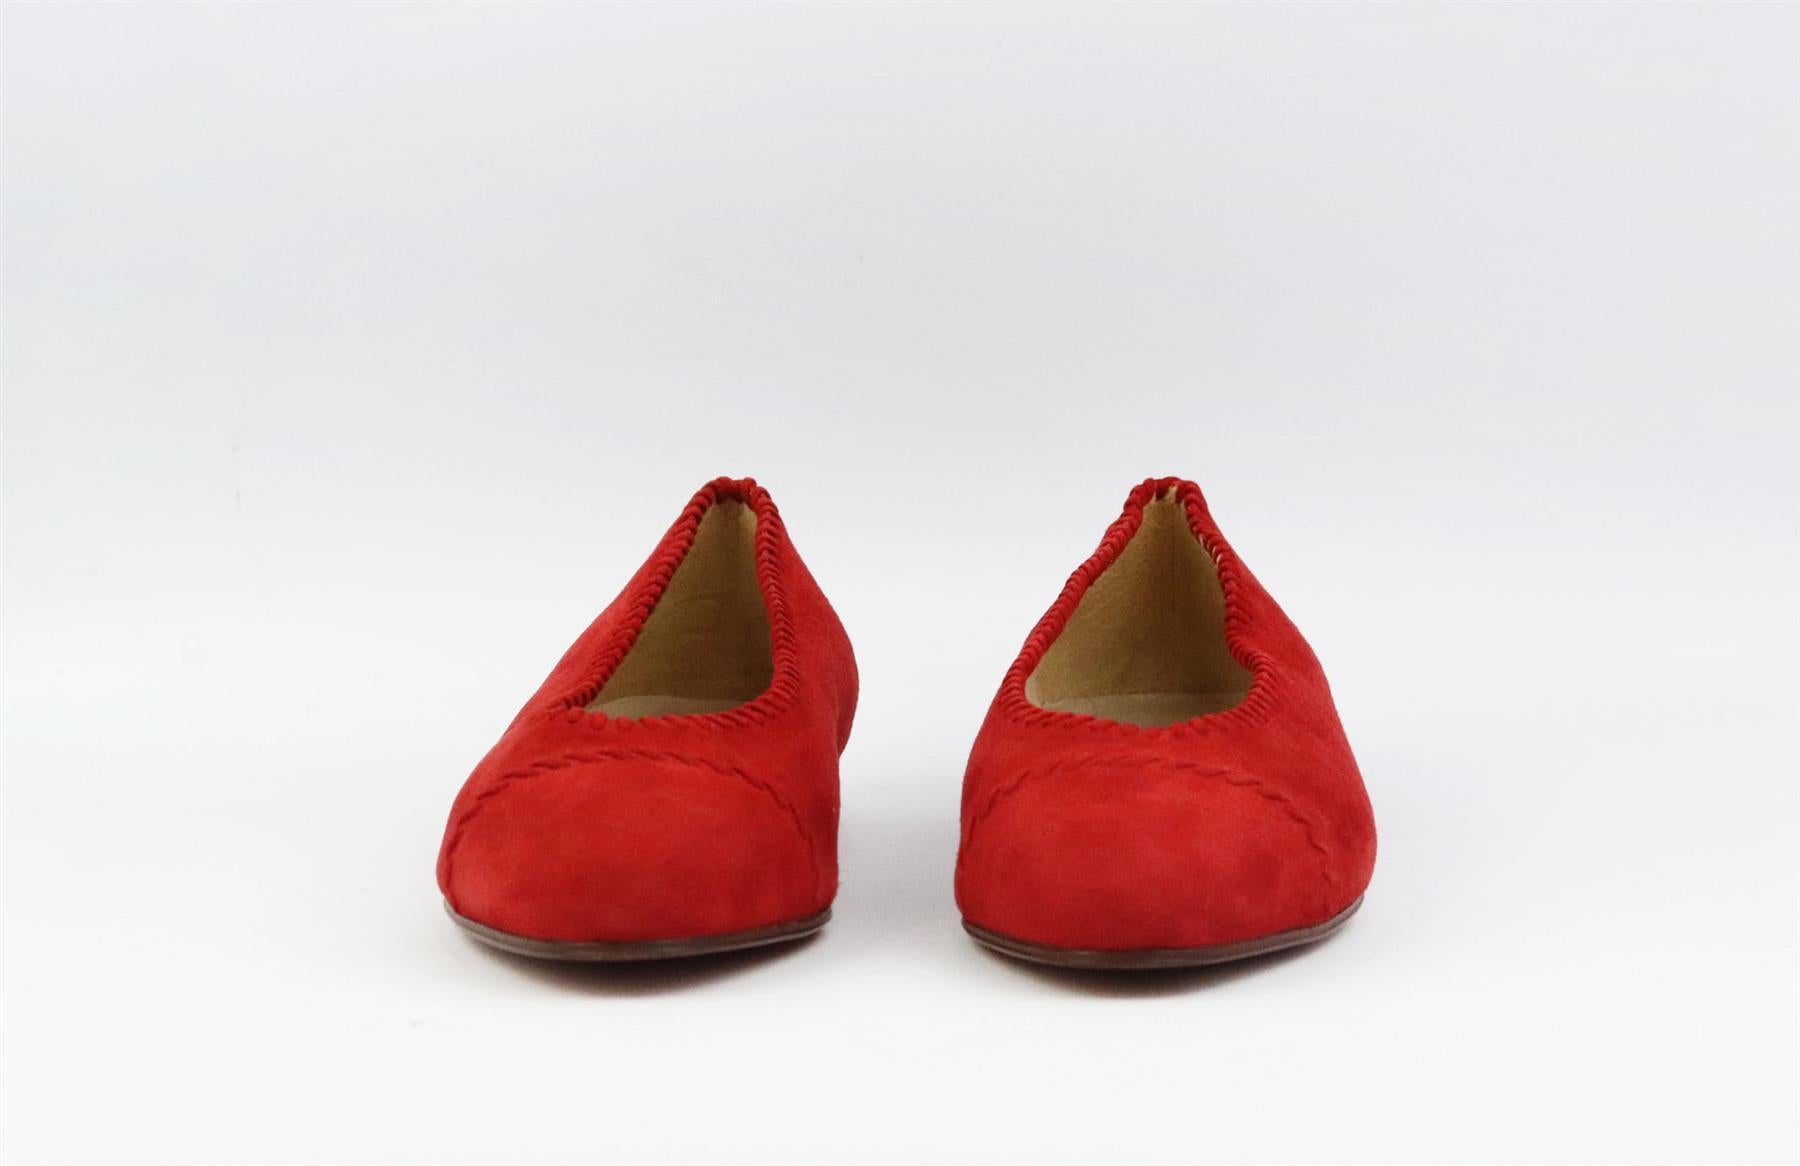 These vintage ballerina flats by Chanel are always stand out pieces, even designs as classic as these flats, made in Italy from red suede that are balanced out with an almond toe and finished with whipstitched detail. Sole measures approximately 10